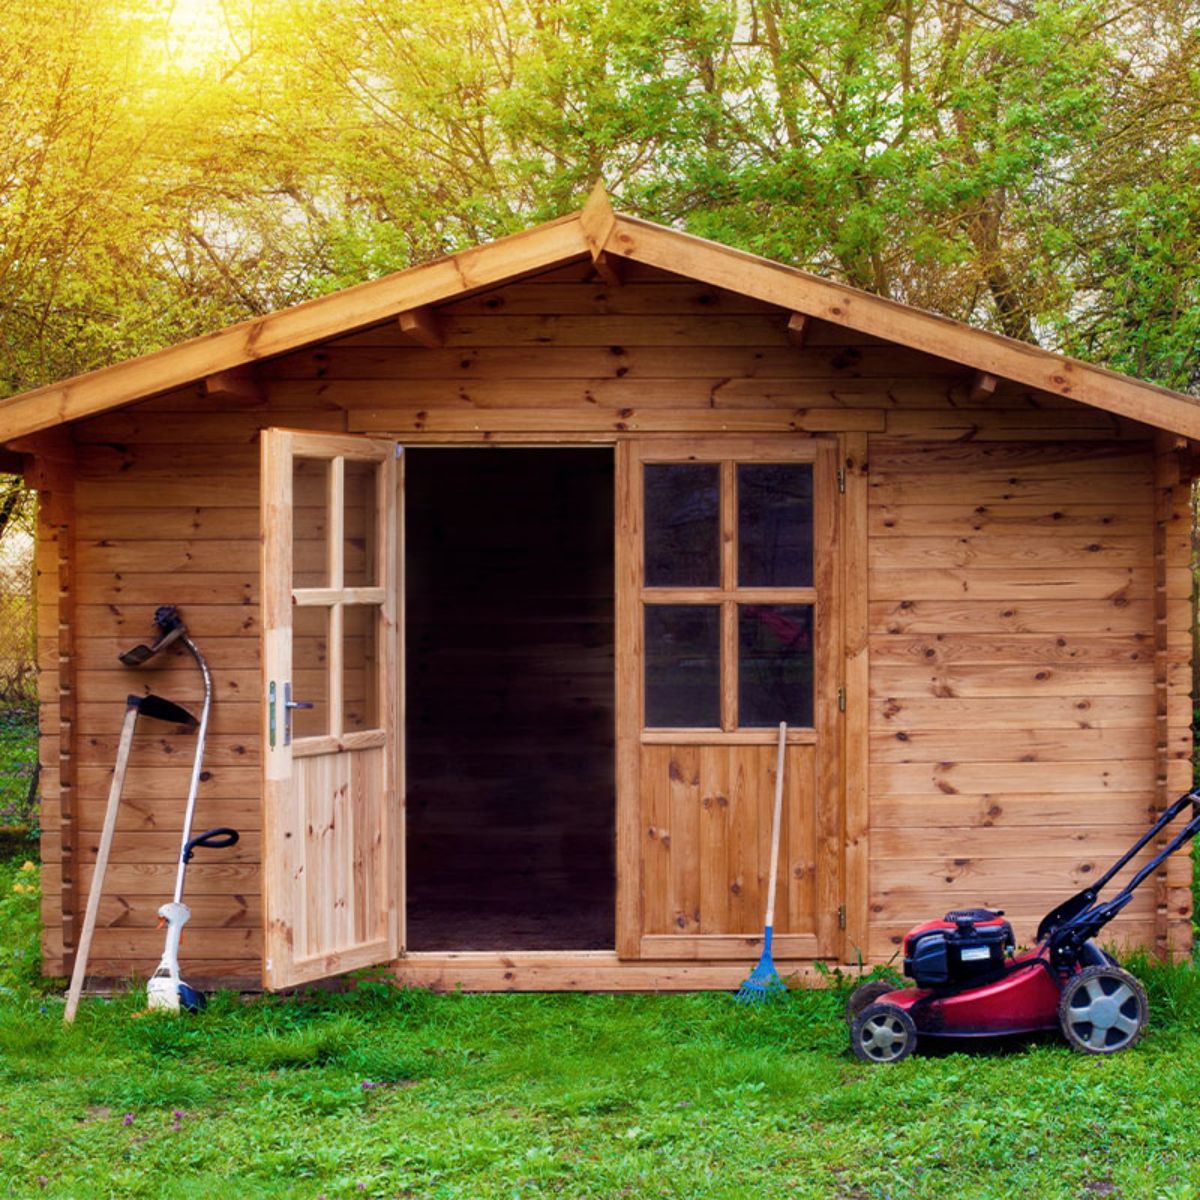 Got a Shed Project?